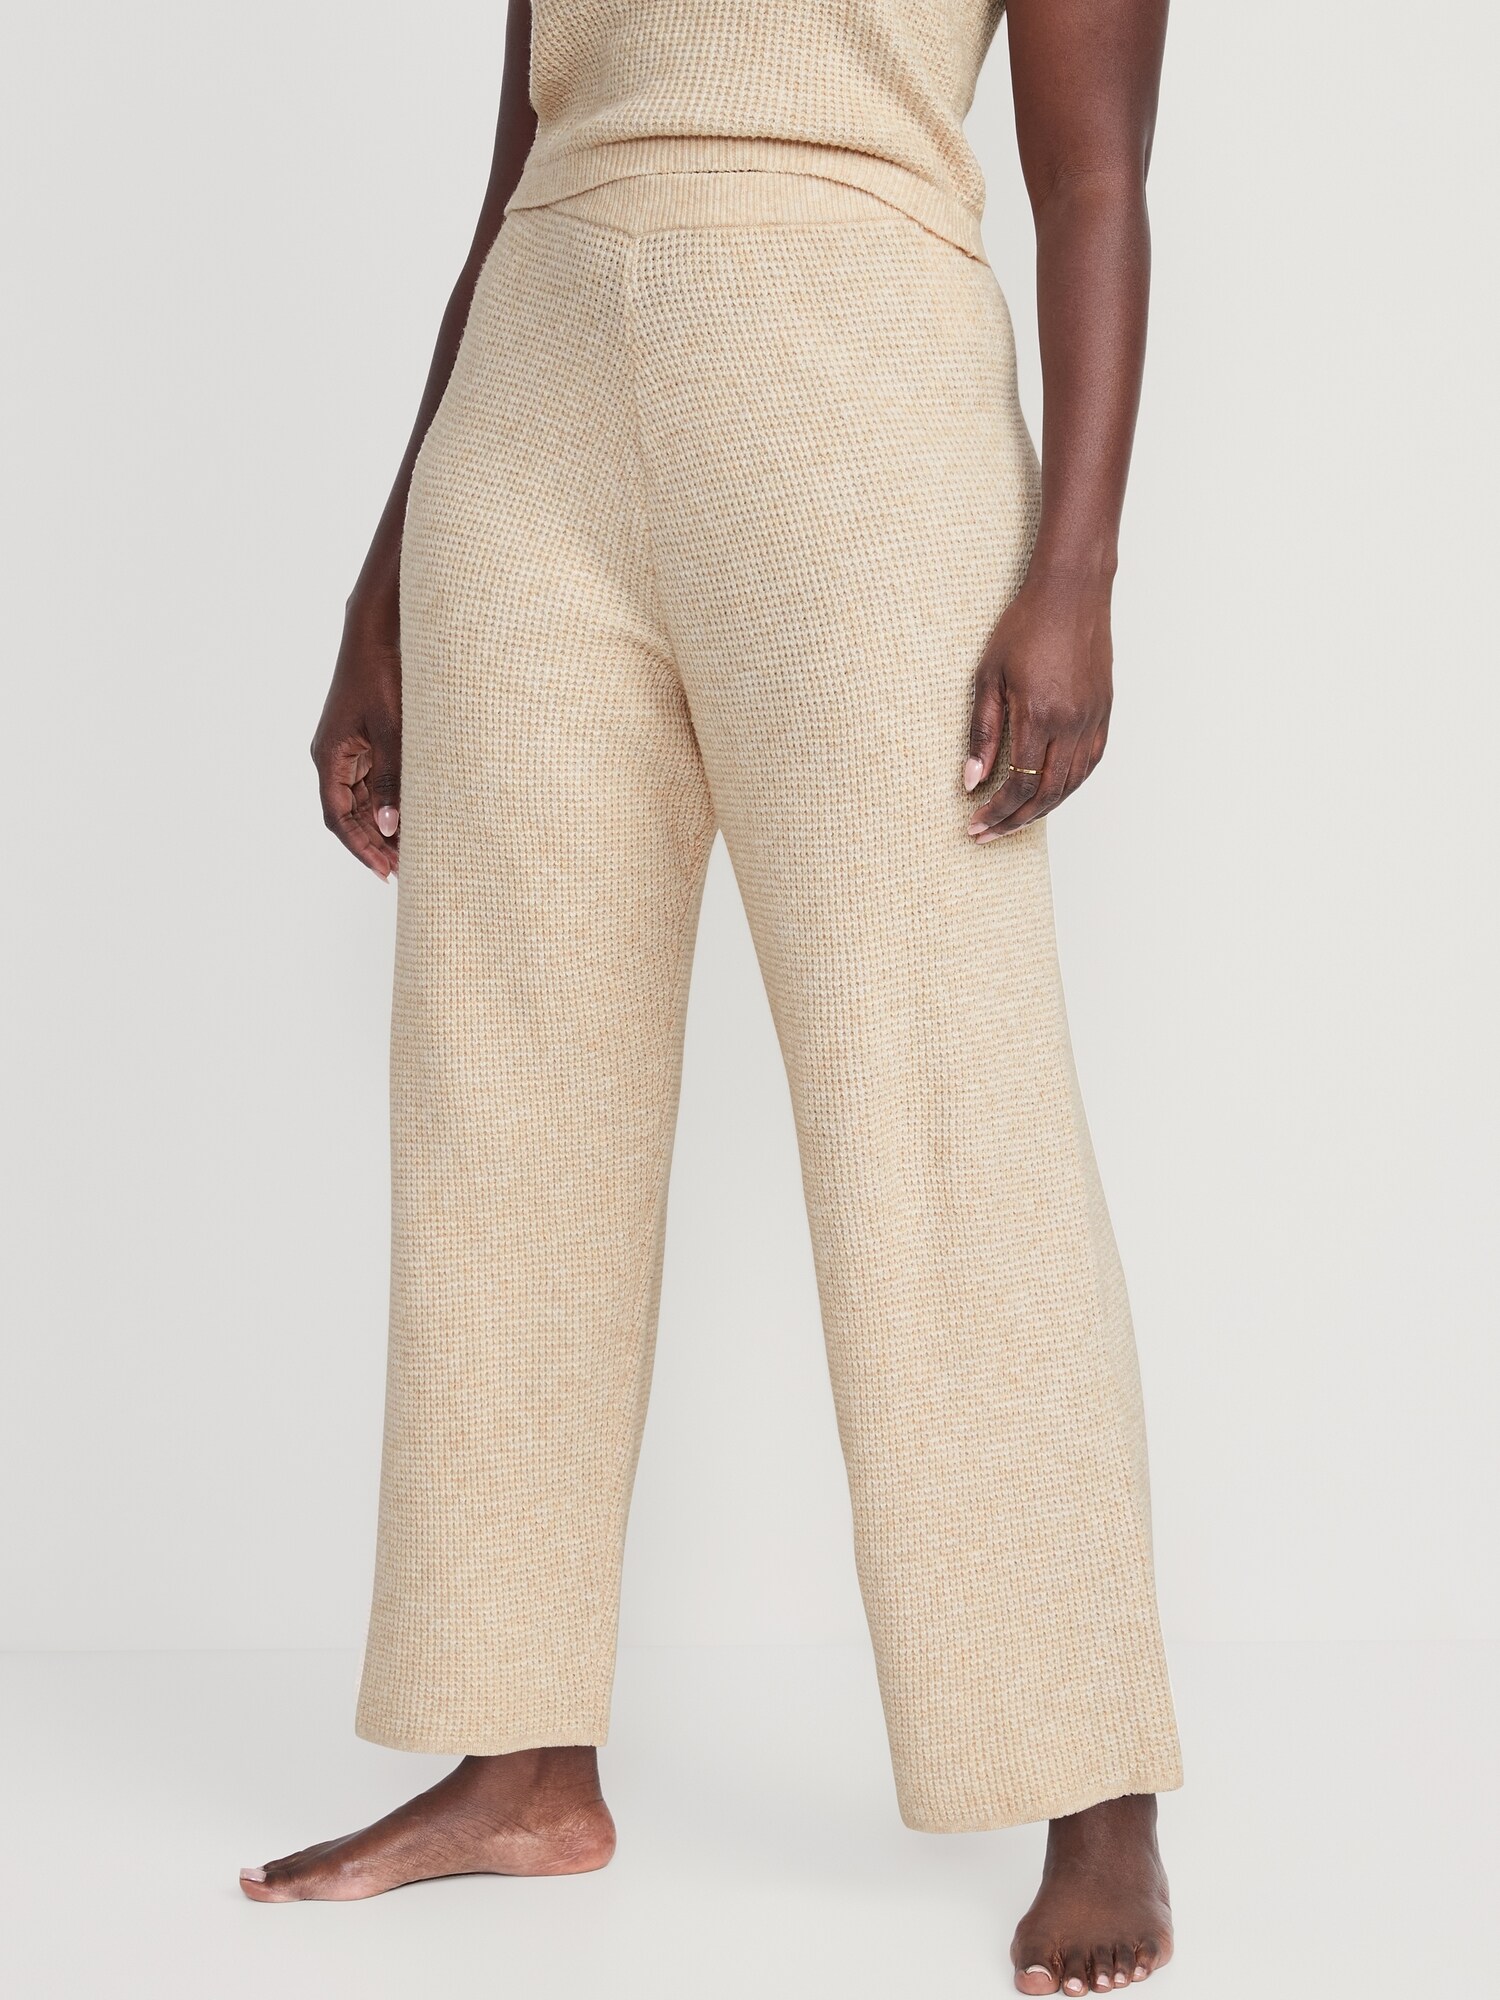 Soft Surroundings Sumptuous Pull on Tan Ivory Wide Leg Flare Pants Large -  $49 - From Gina